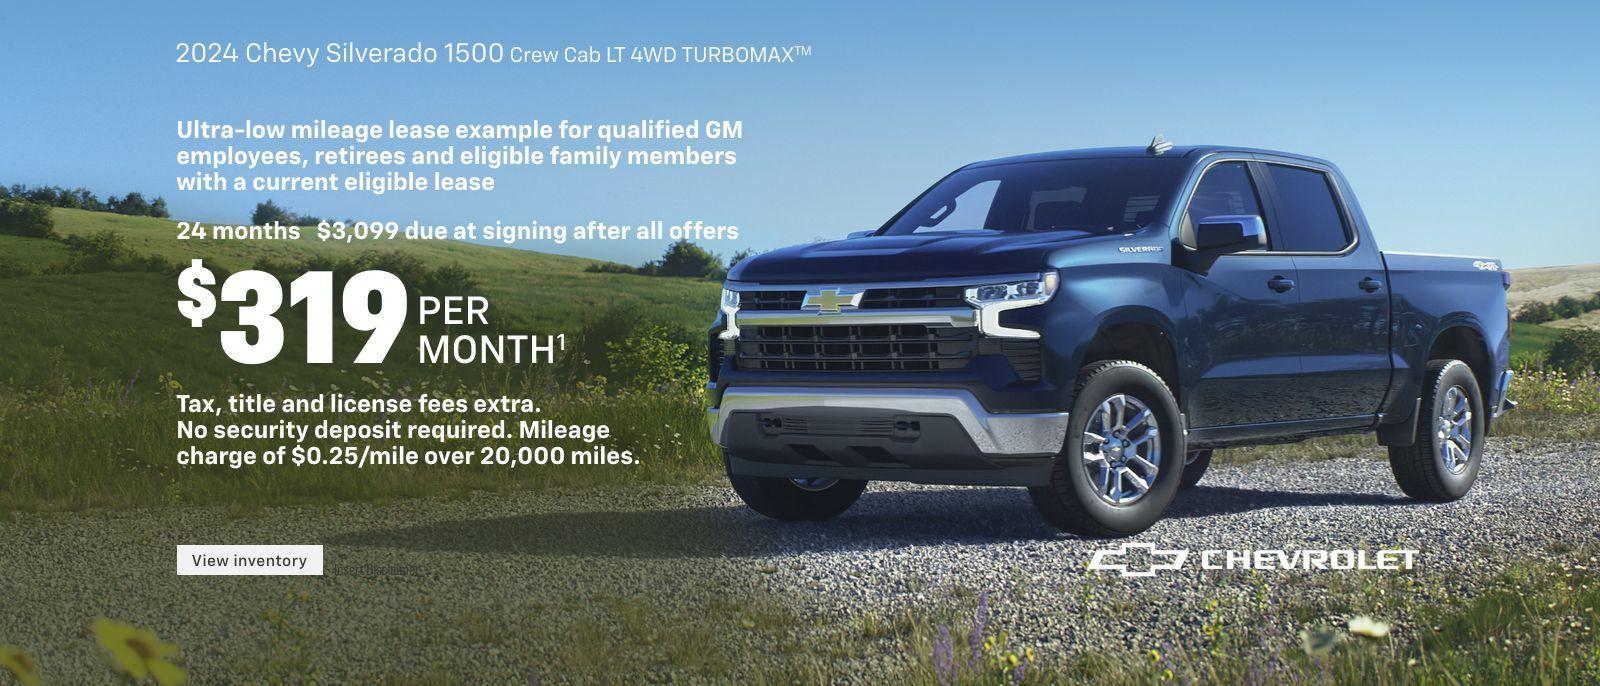 2024 Chevy Silverado 1500 Crew Cab LT 4WD Turbomax. Ultra-low mileage lease example for qualified GM employees, retirees and eligible family members with a current eligible lease. $319 per month. 24 months. $3,099 due at signing after all offers. Tax, title and license fees extra. No security deposit required. Mileage charge of $0.25/mile over 20,000 miles.